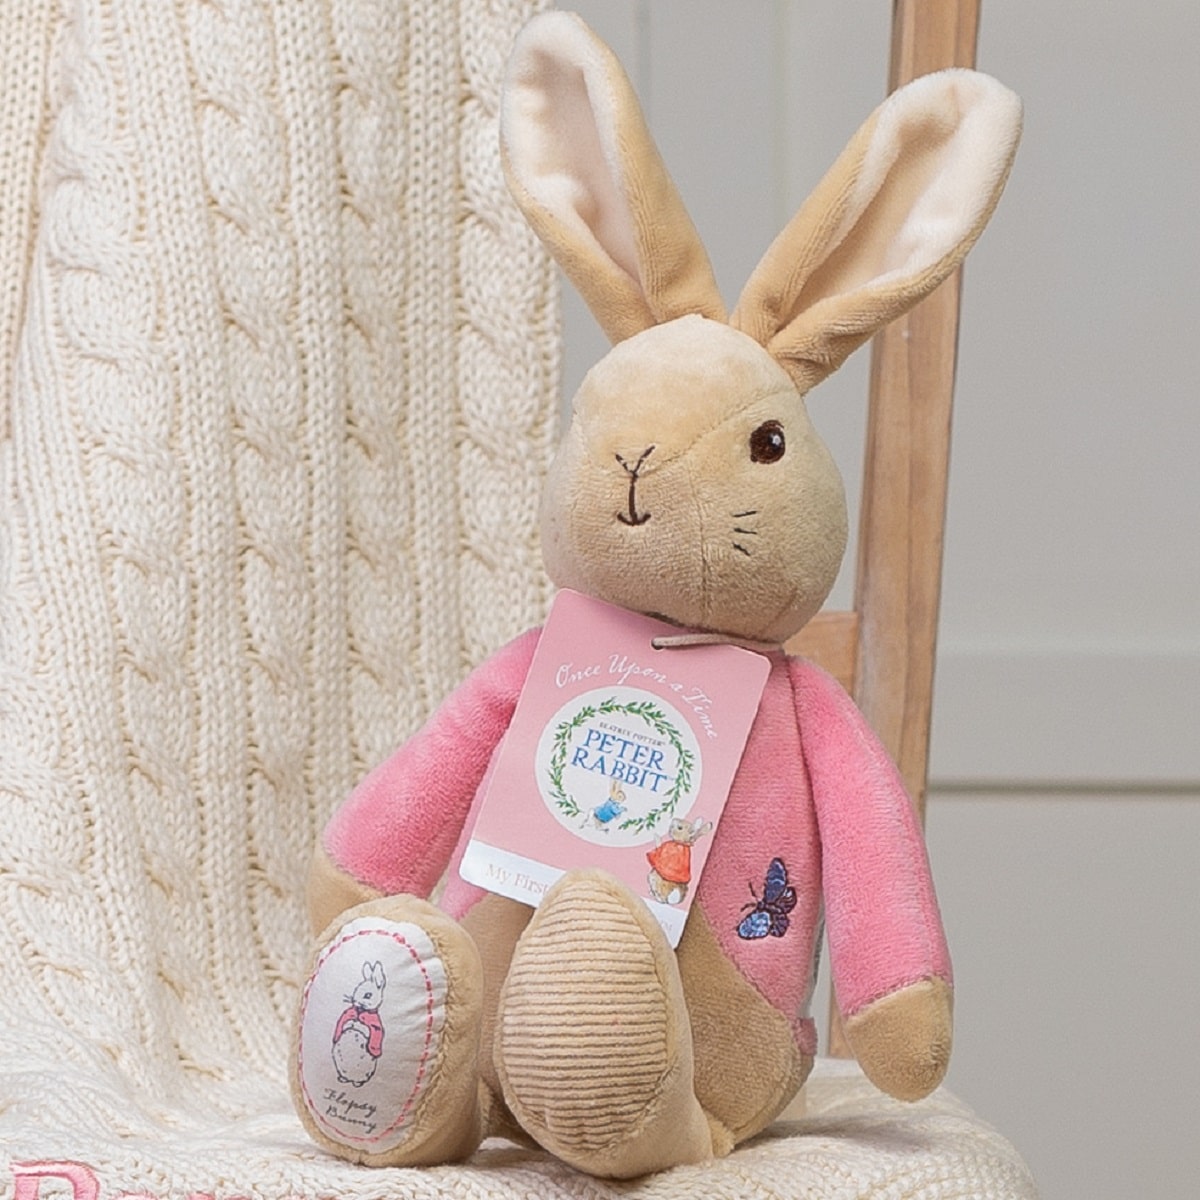 Toffee Moon personalised luxury cable baby blanket and Flopsy Bunny soft toy